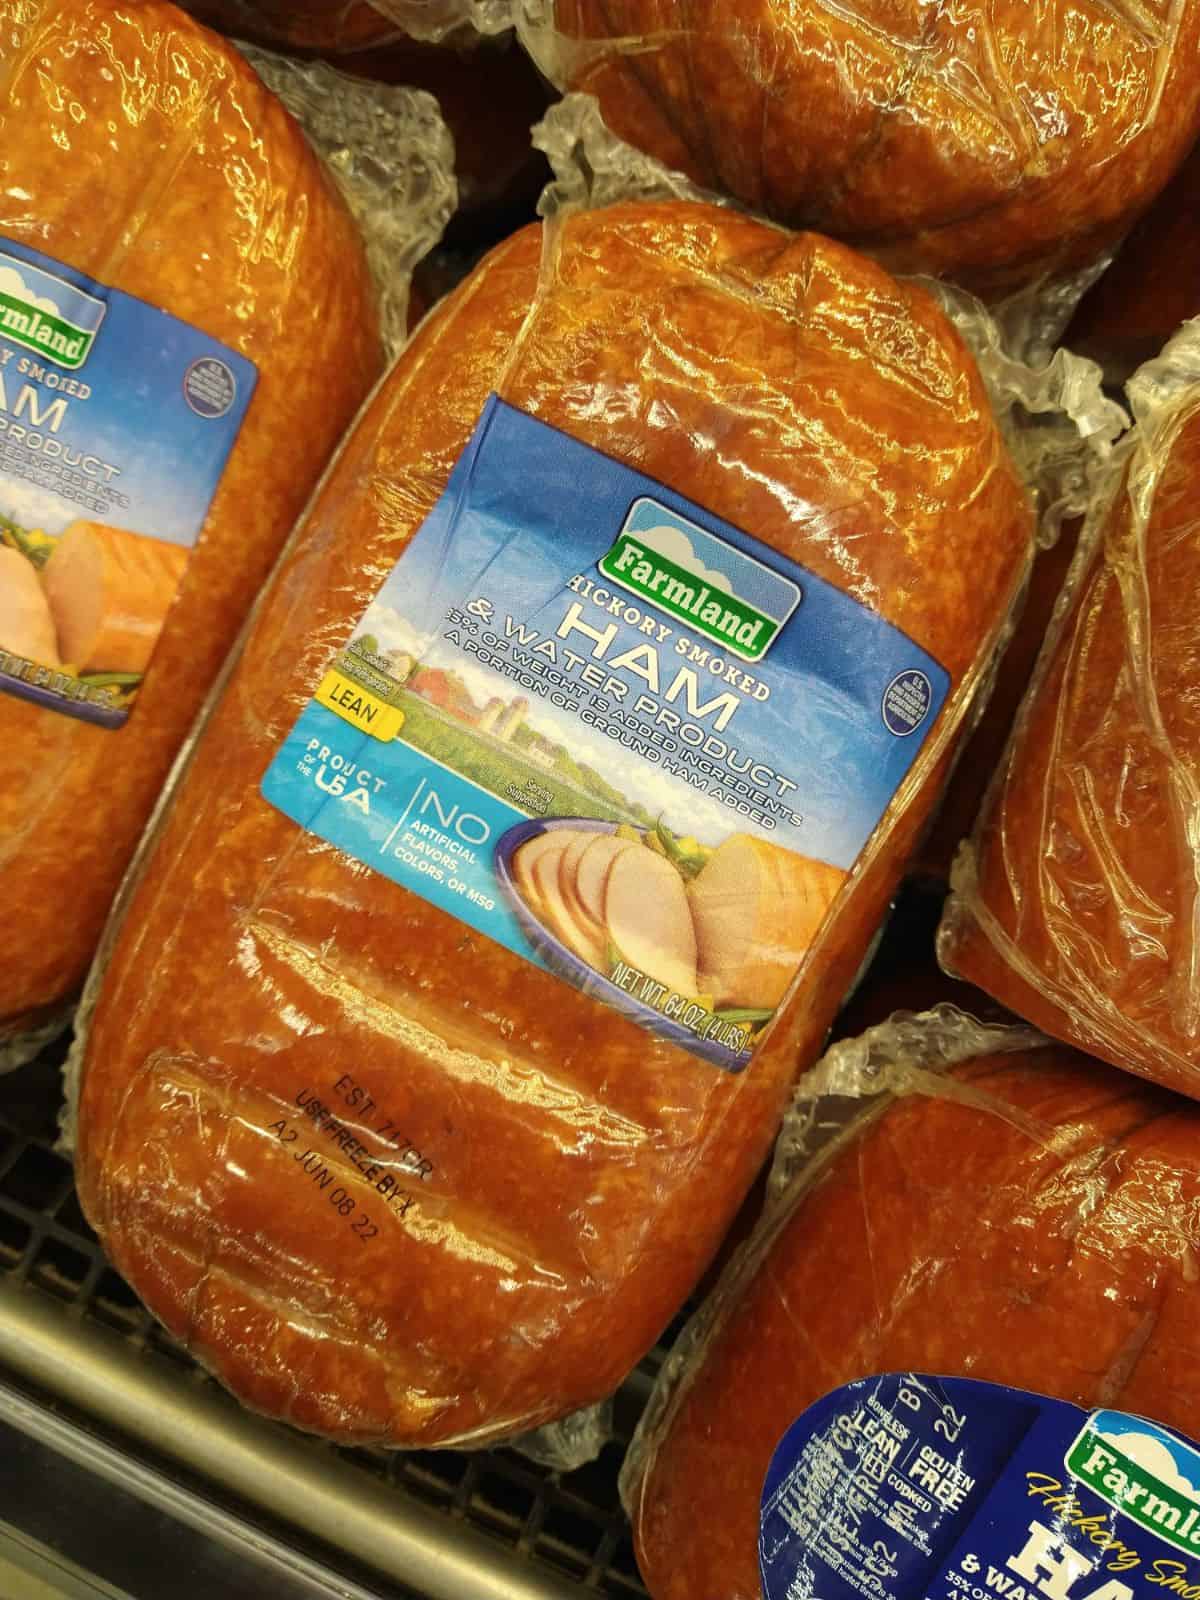 Farmland Hickory Smoked Boneless Ham & water Product at the grocery store.